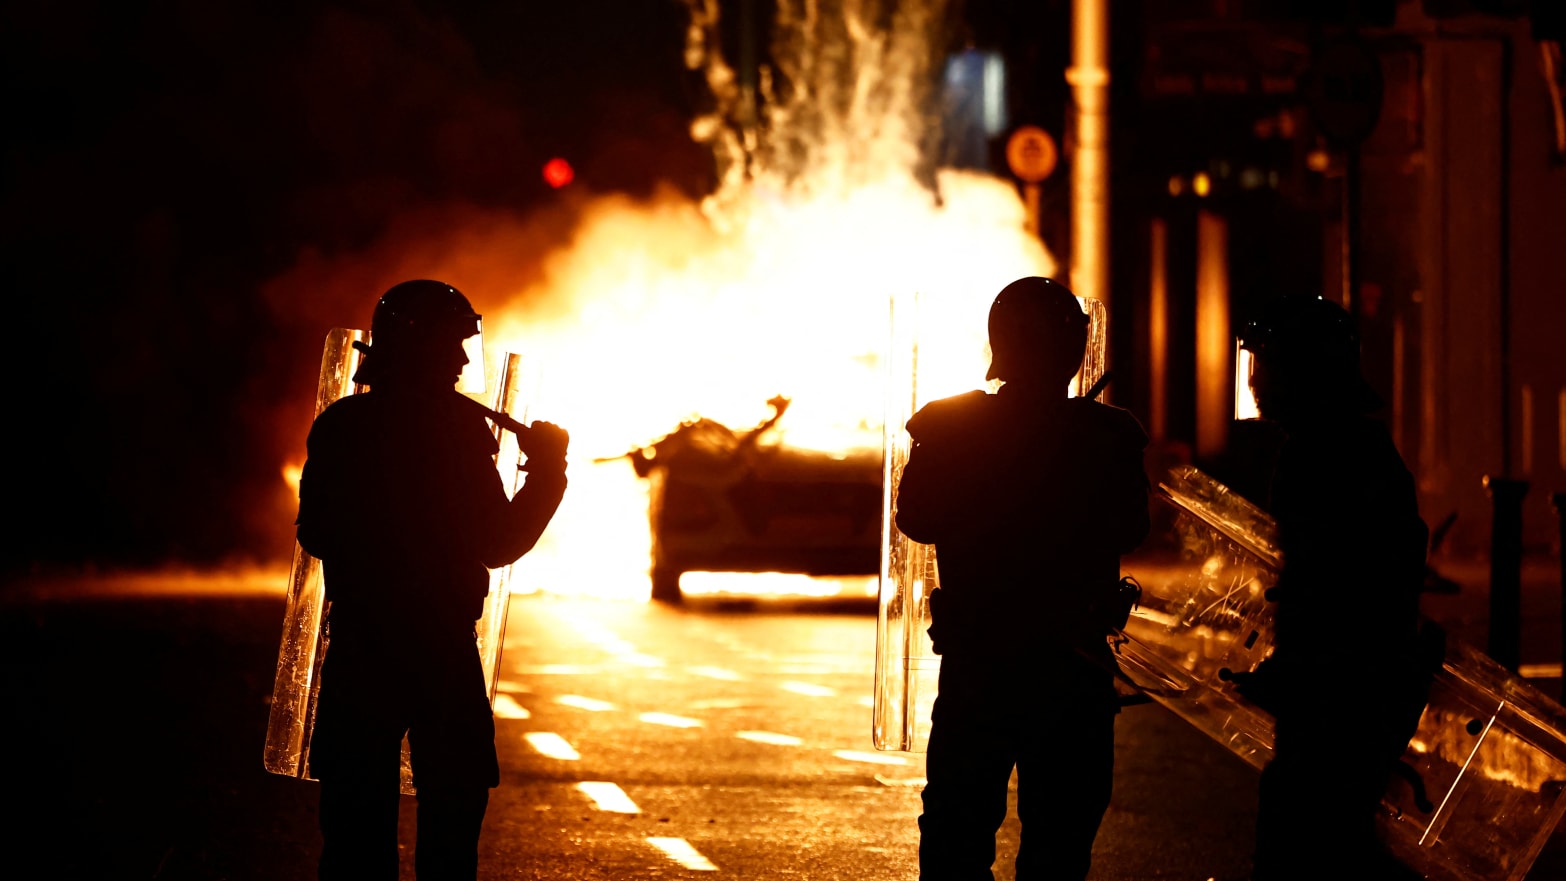 Riot police stands next to a burning police vehicle, near the scene of a suspected stabbing that left few children injured in Dublin, Ireland, November 23, 2023.